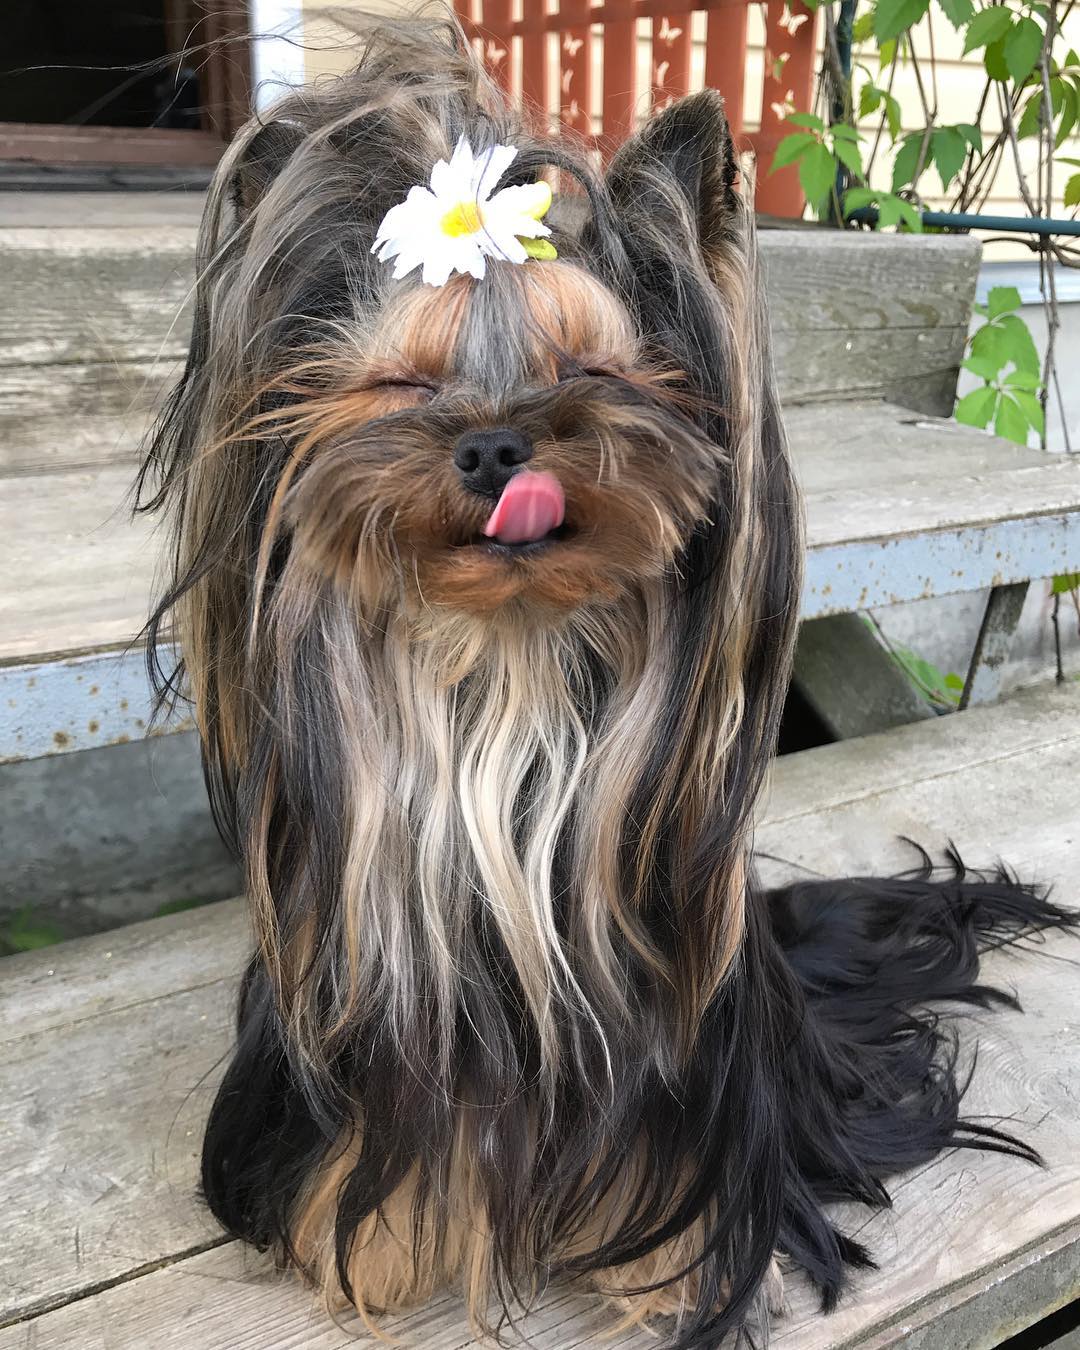 A Yorkshire Terrier with a long thick hair and with a flower hair tie on top of its head while sitting on the stairway and licking its mouth